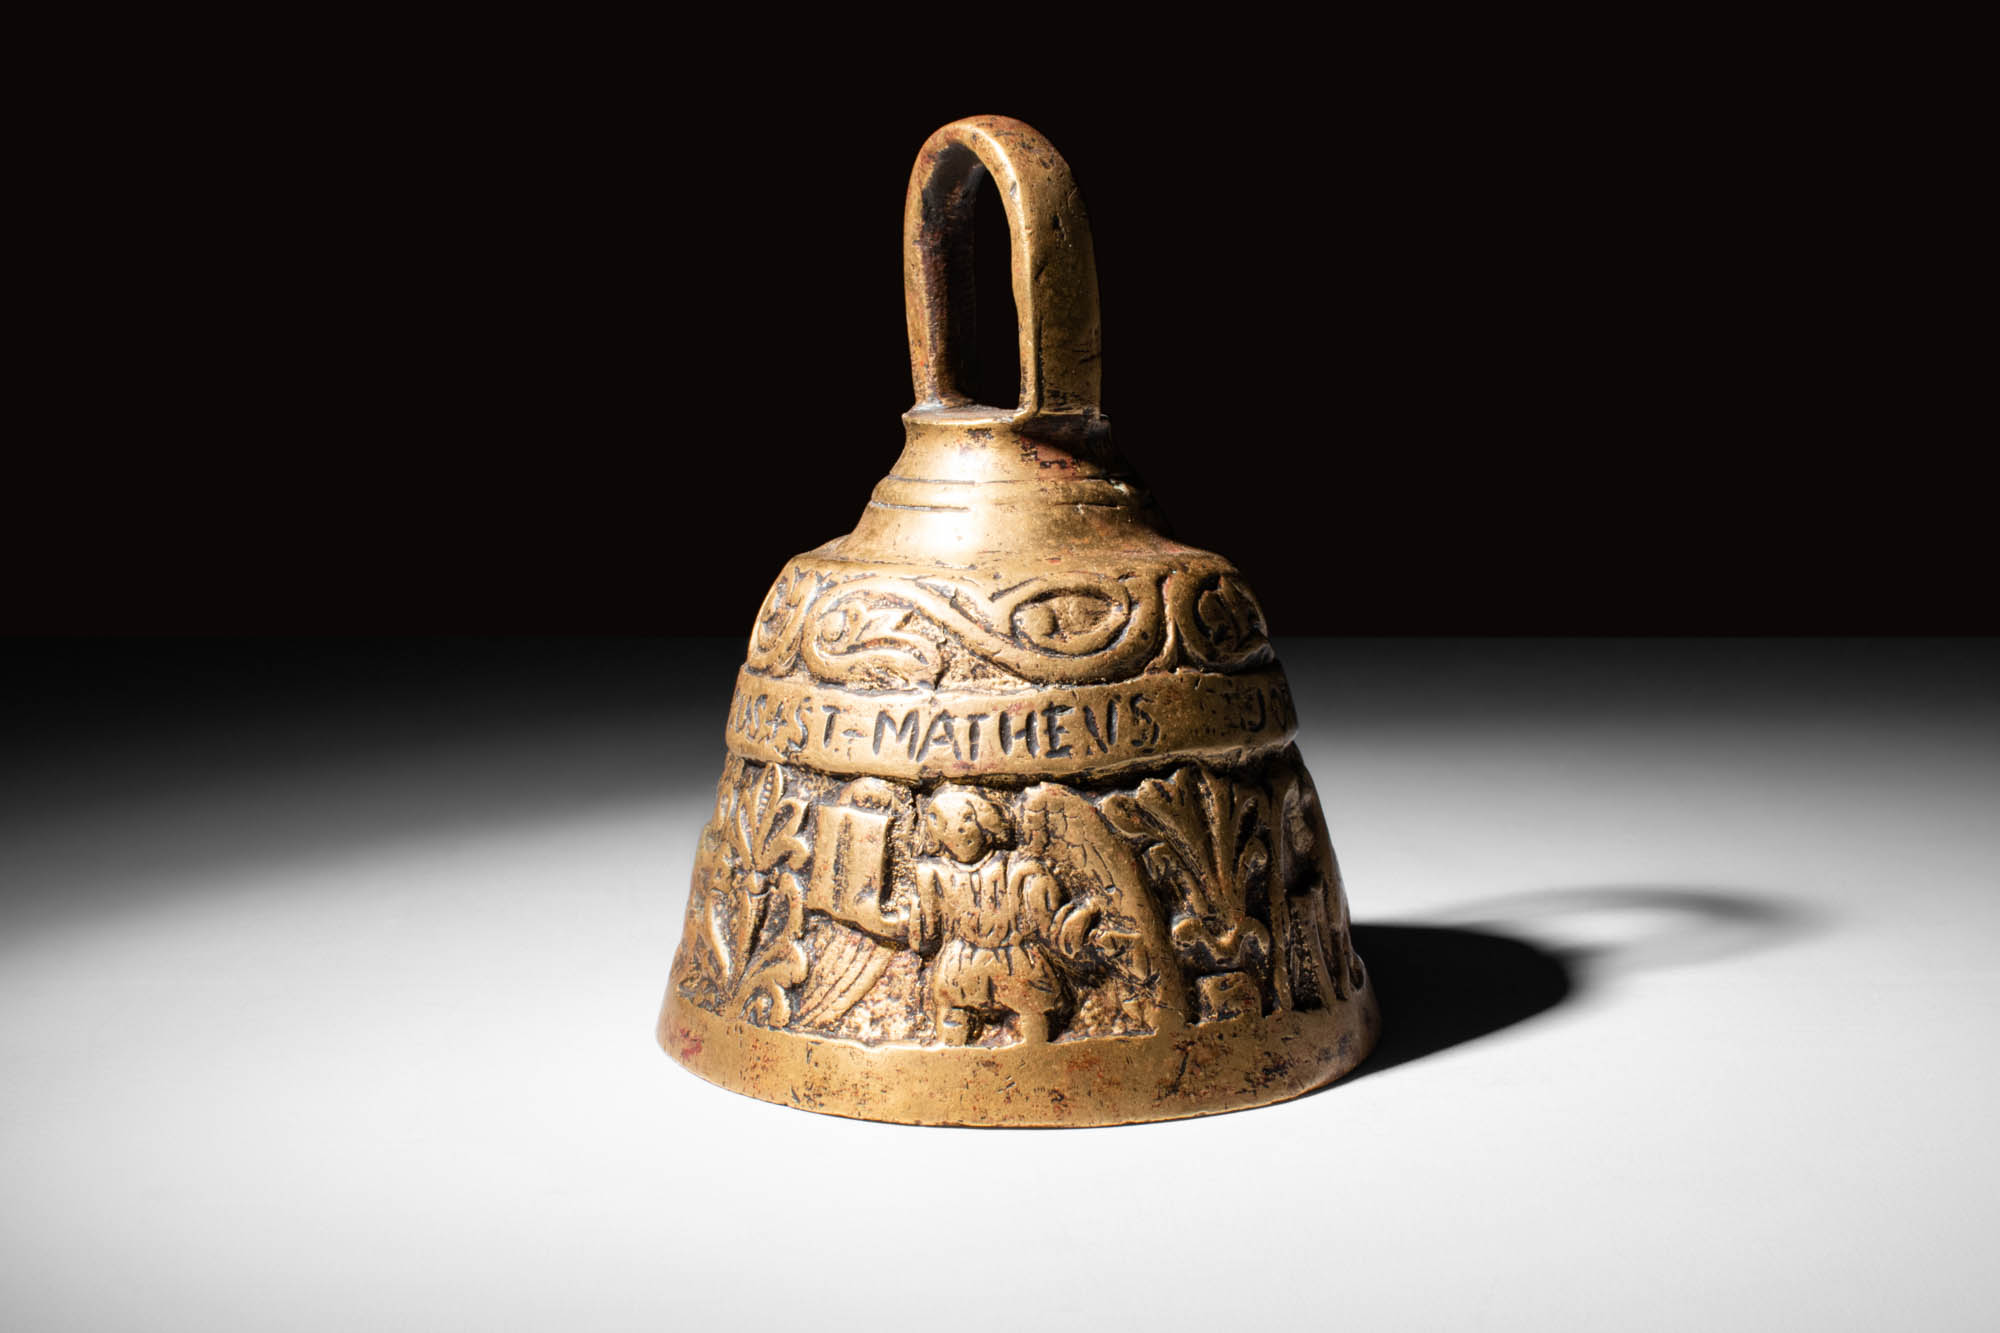 LATE MEDIEVAL BRITISH BRASS BELL - Image 2 of 6